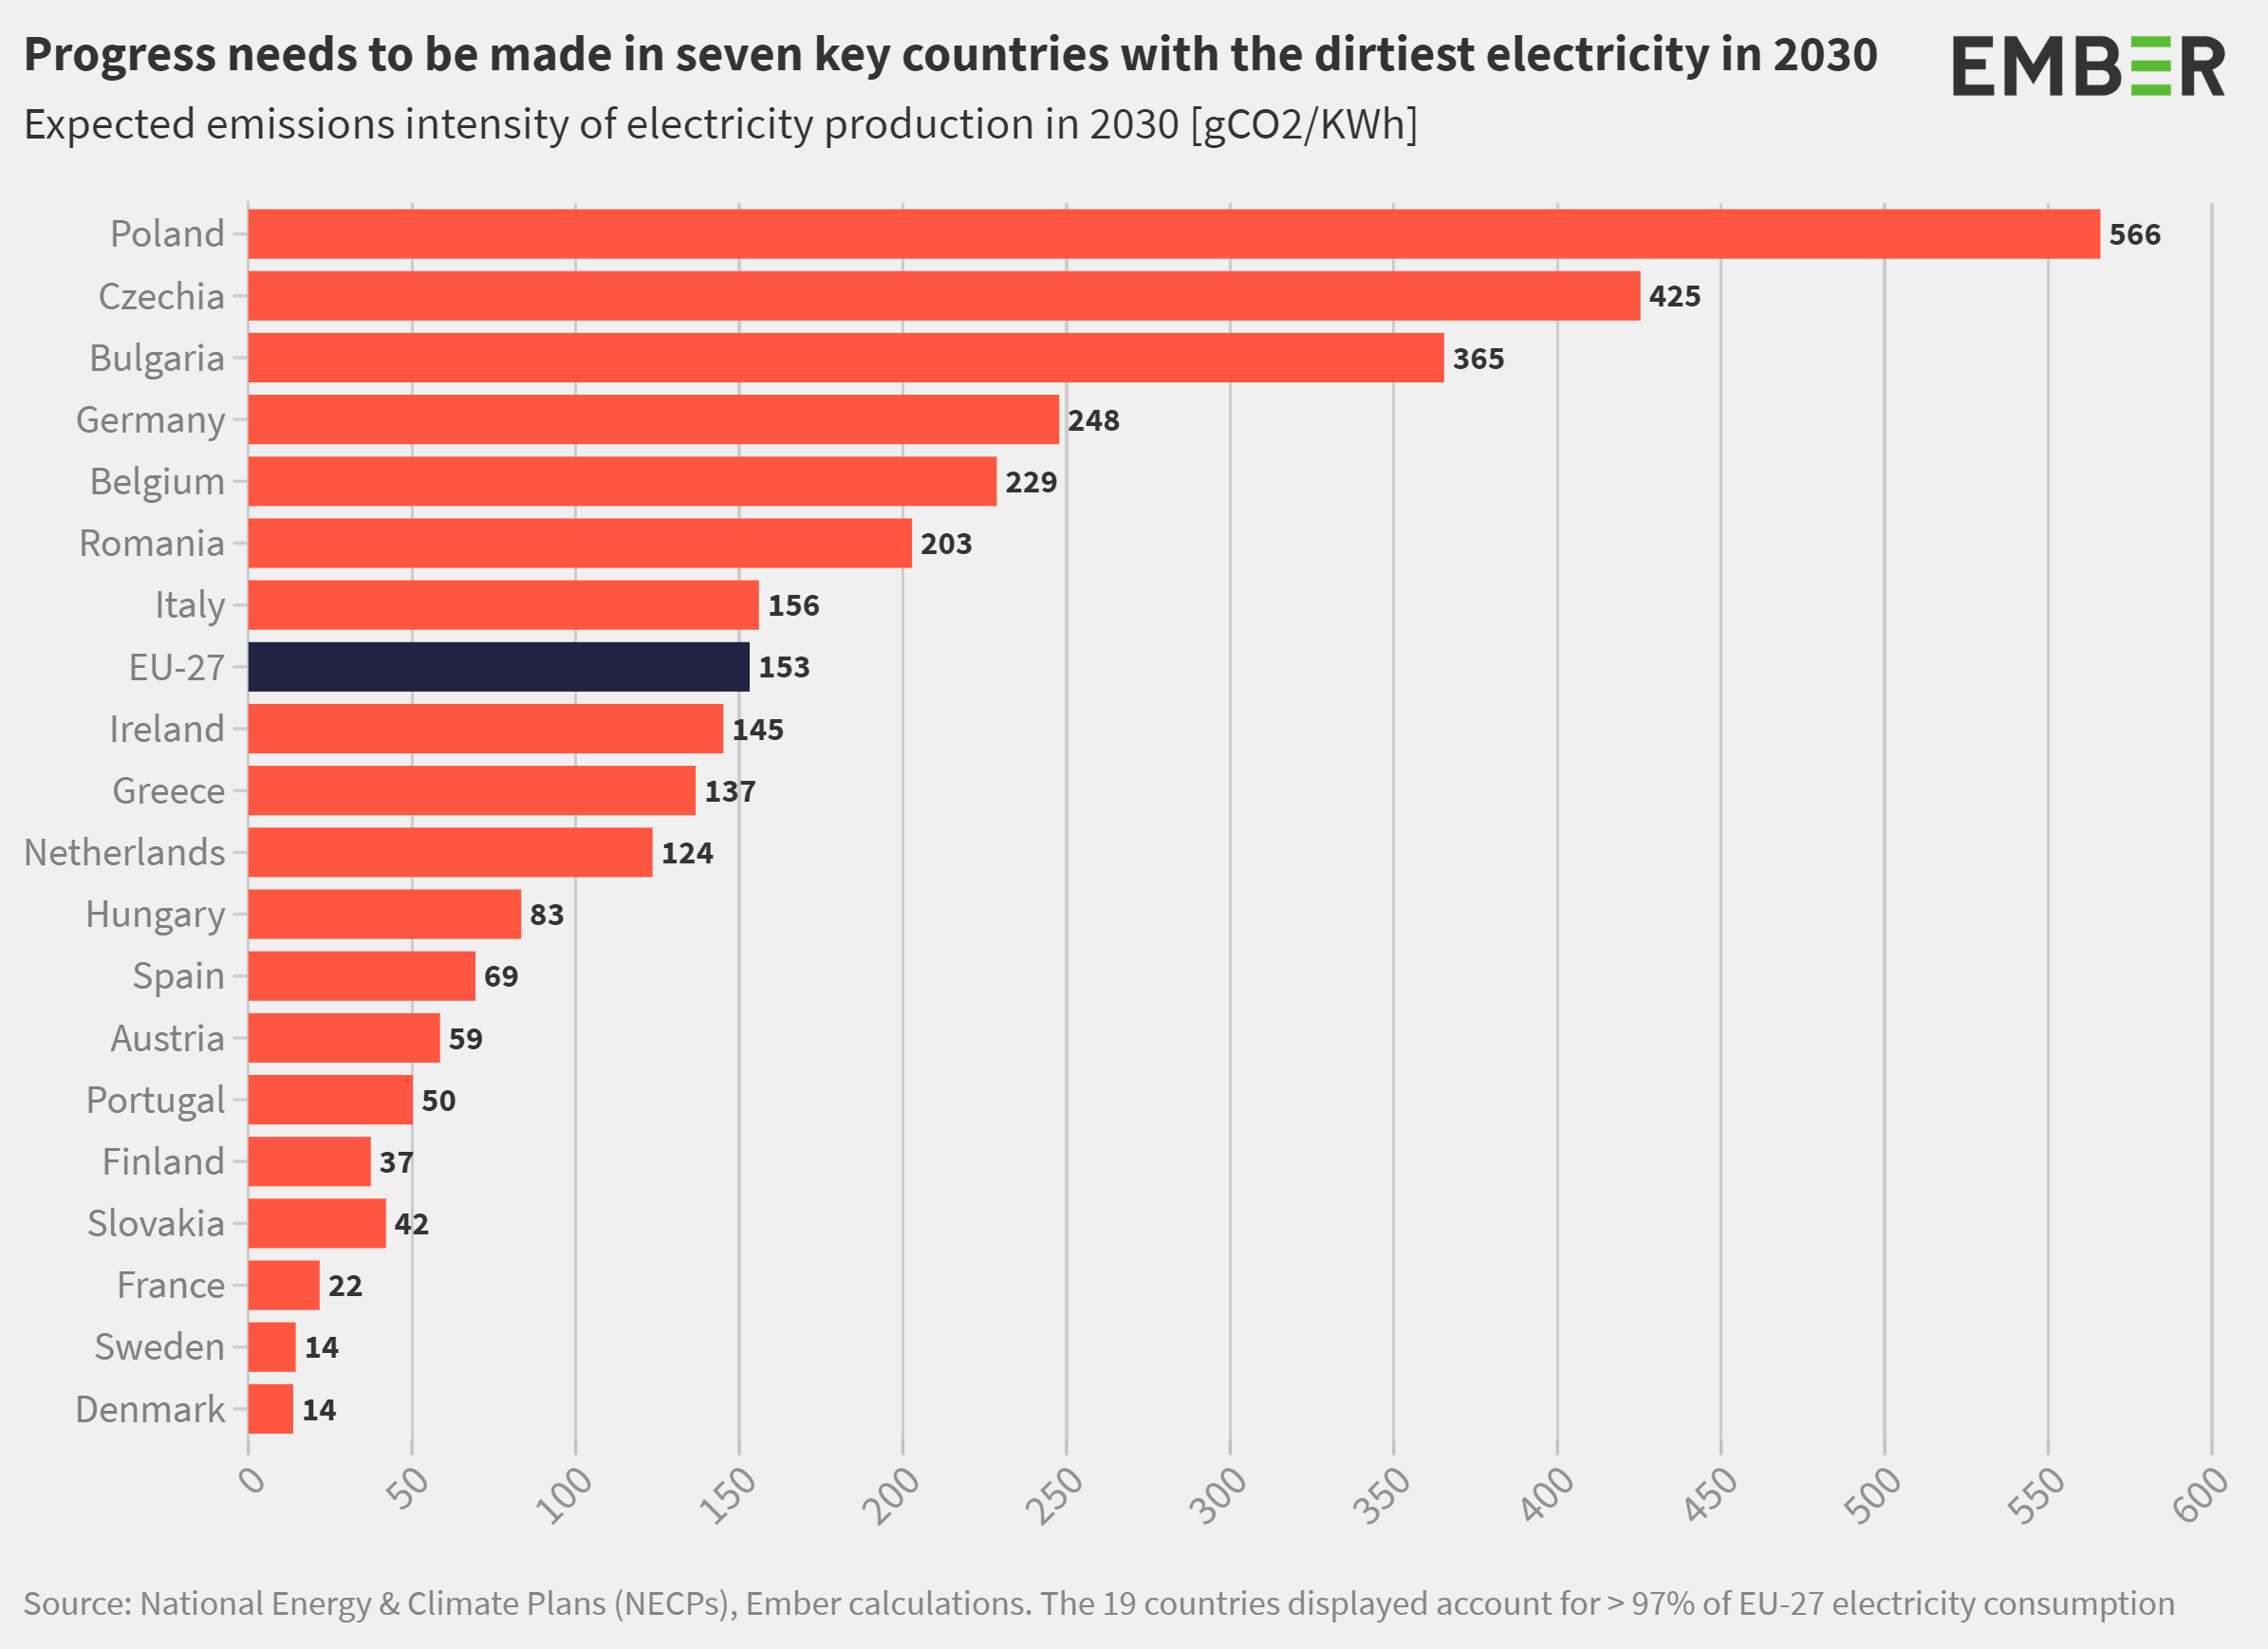 Headline-graphic-progress-needs-to-be-made-in-7-countries-with-dirtiest-grids-by-2030.png